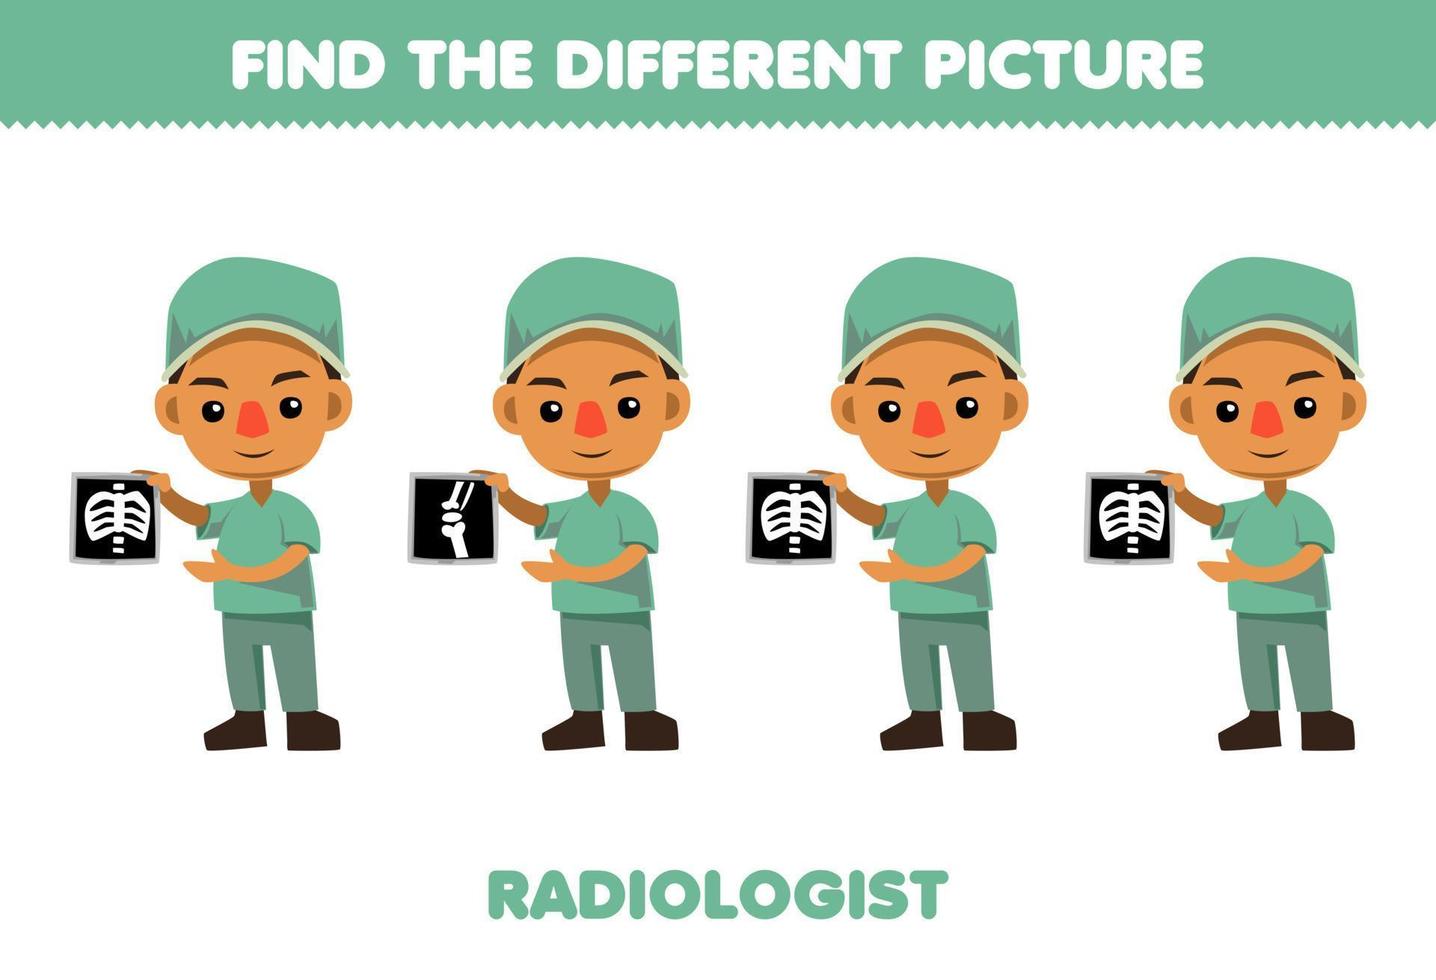 Education game for children find the different picture of cute cartoon radiologist profession printable worksheet vector